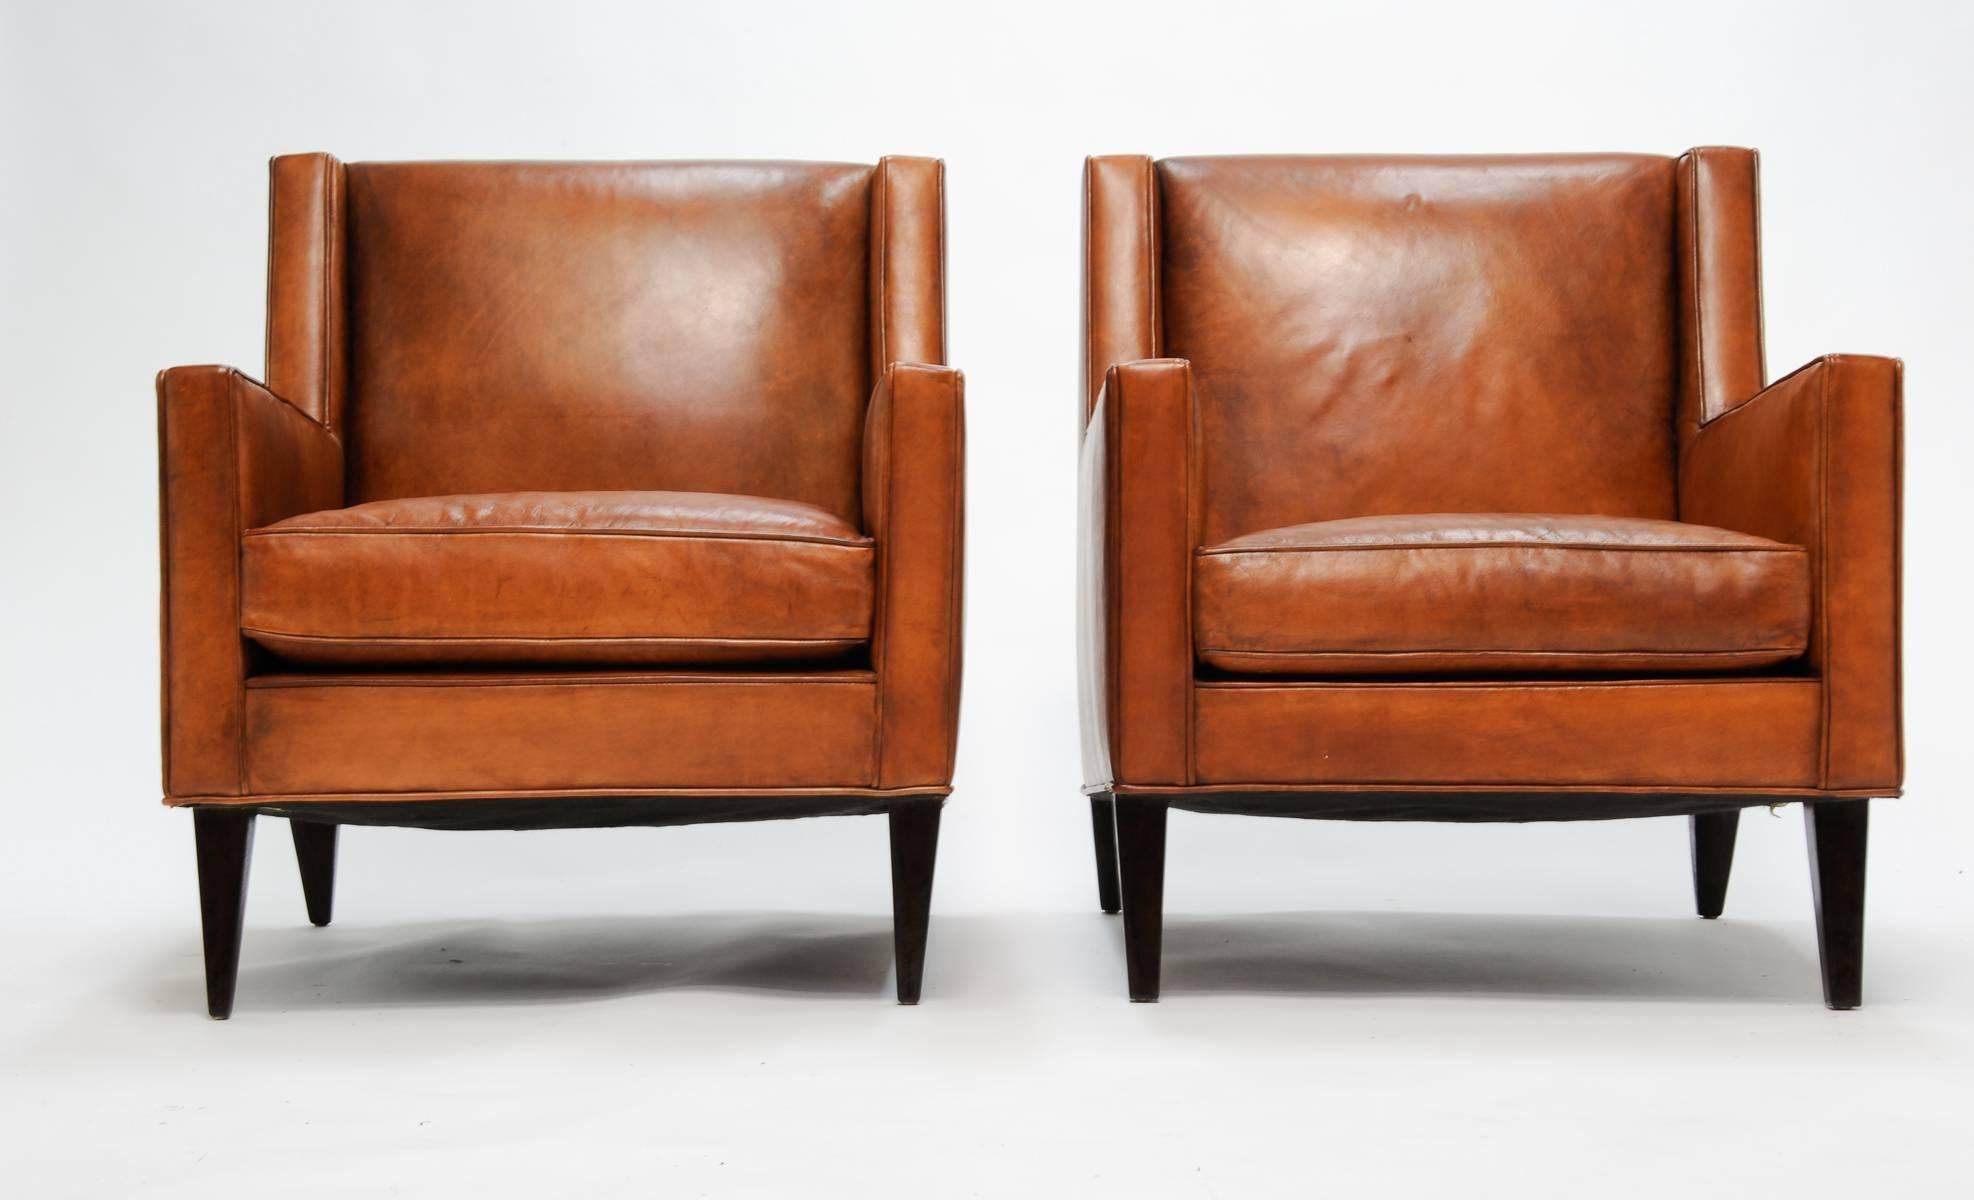 The simple and eleganance of the modern master is clear in this pair of leather chairs by Edward Wormley for Dunbar. The chairs are the excellent build quality of the Dunbar company. Arm height is 23